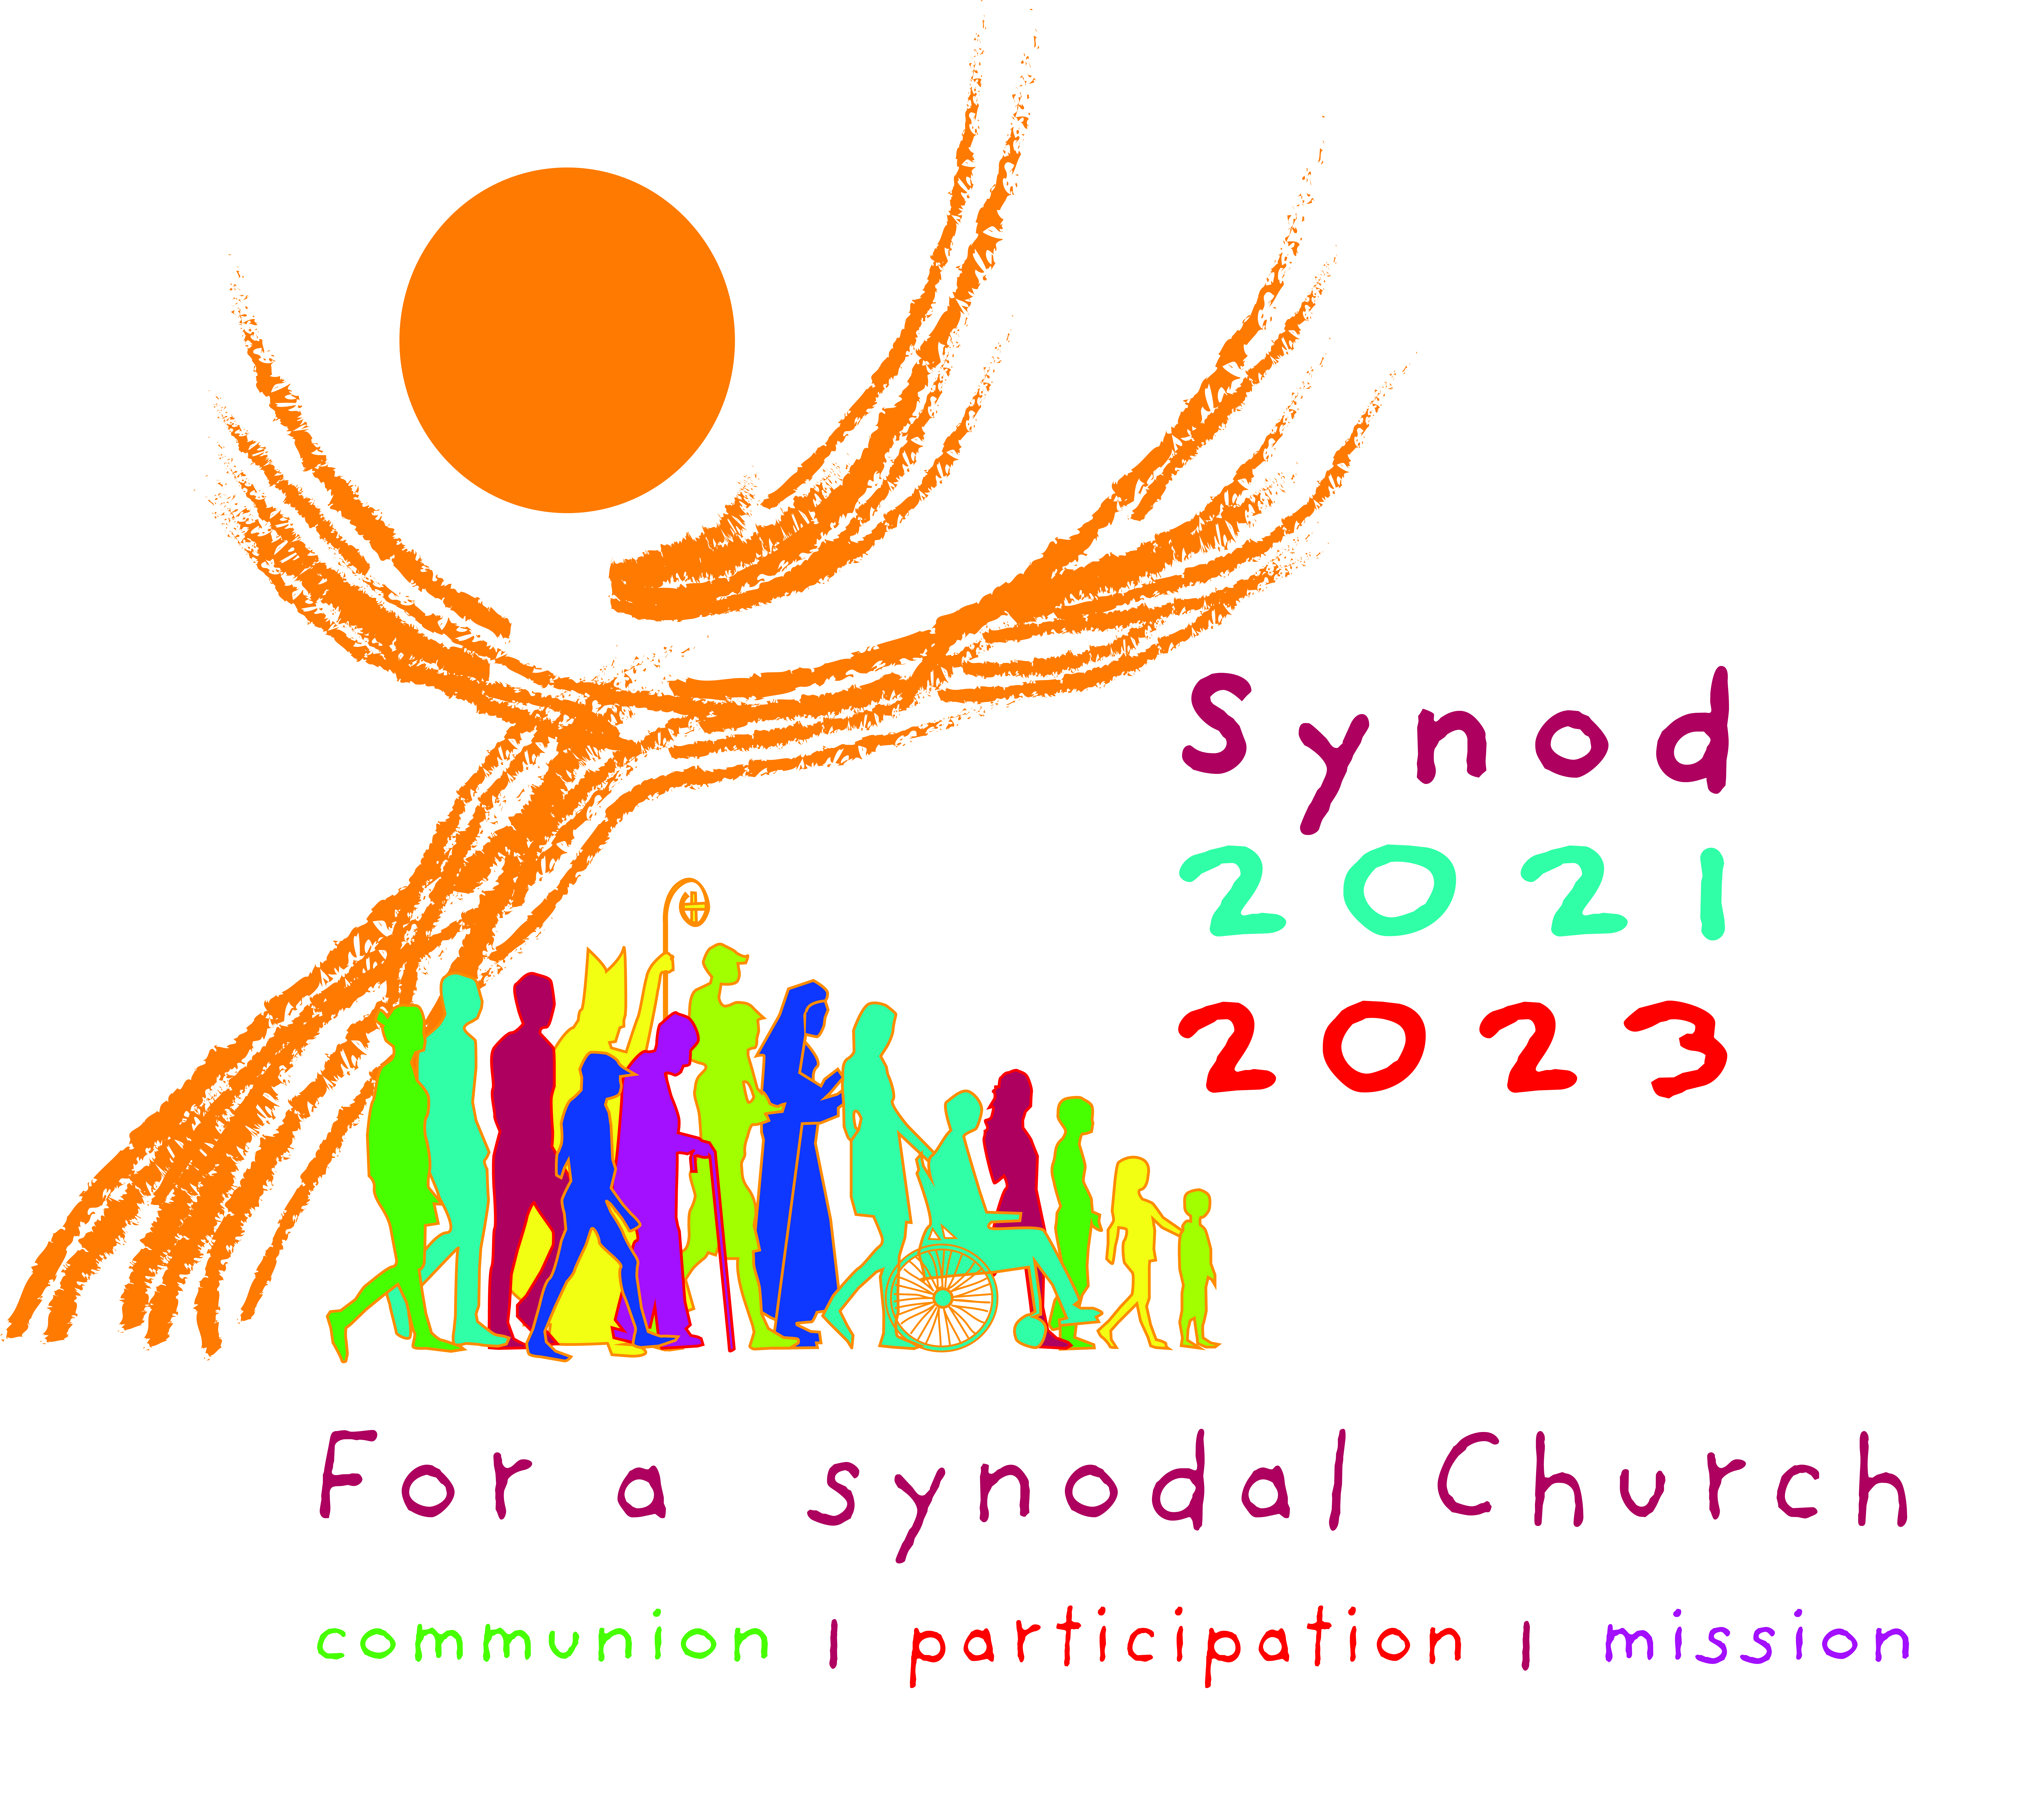 Synod 2021 - 2023: For
a synodal Church: communion, participation and mission. Logo includs colourful text and handwritten looking type, with an abstract drawing of an angel in orange and a diverse collection of people facing the same direction.